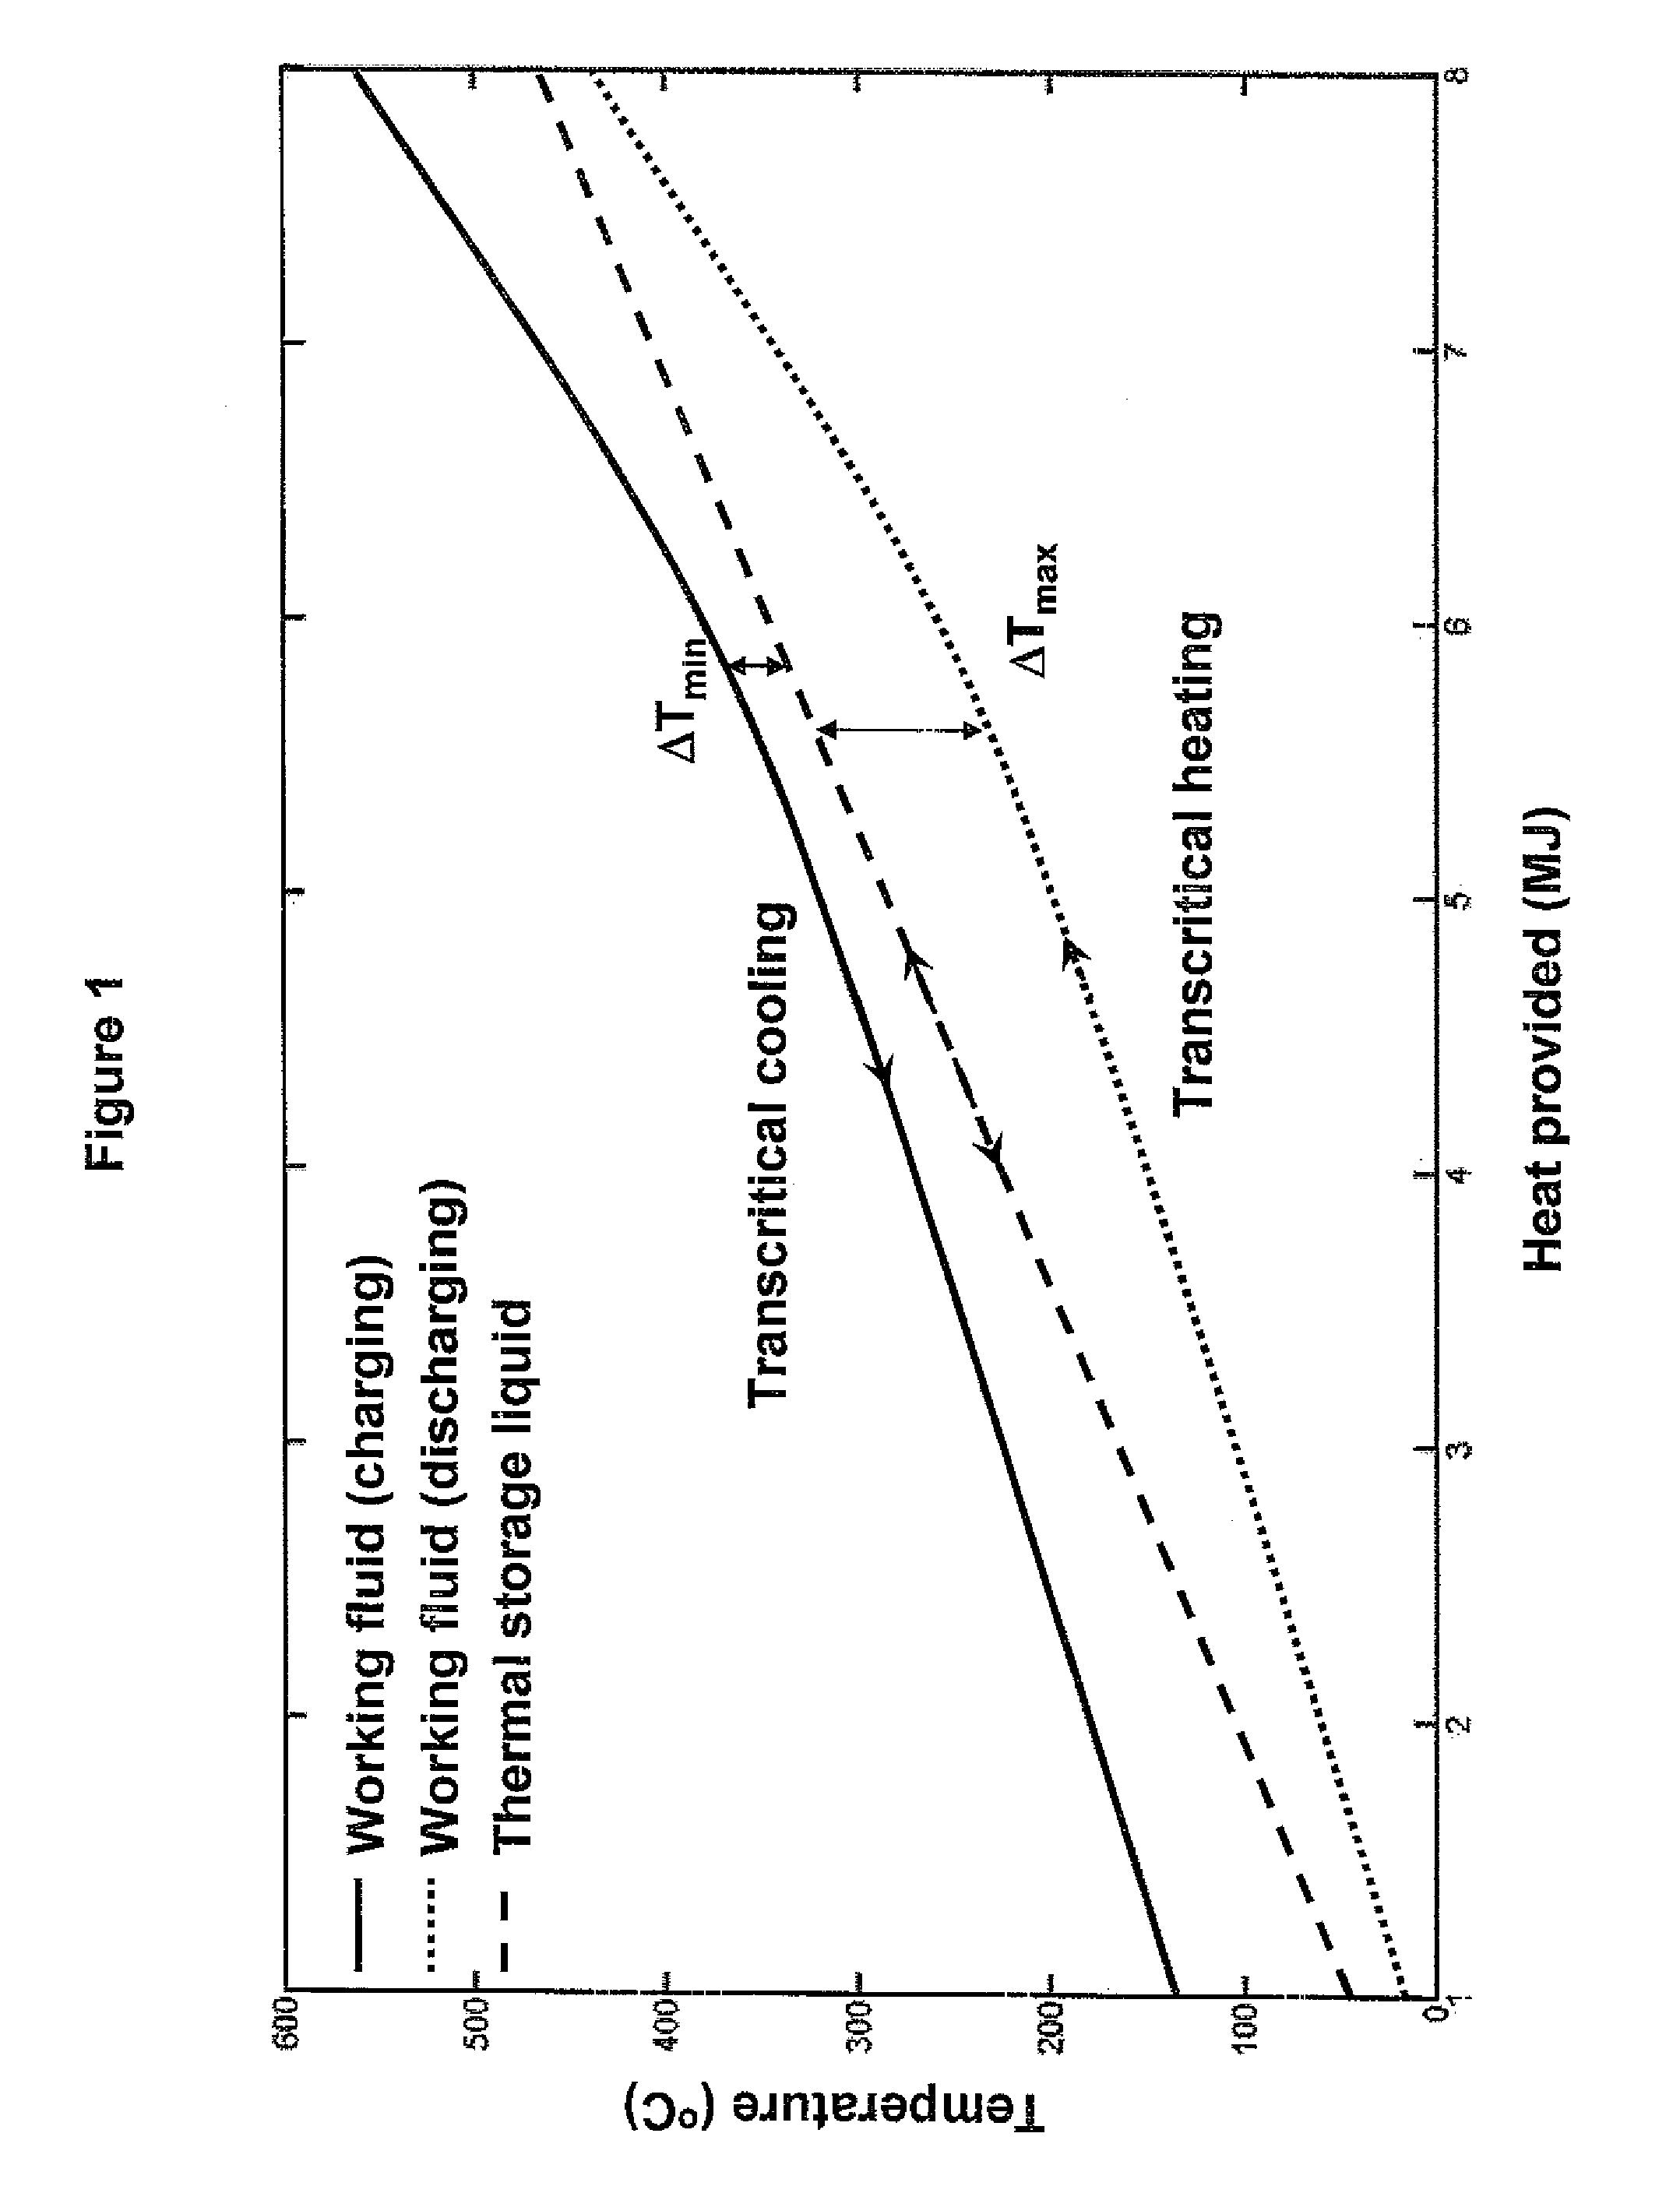 Thermoelectric energy storage system with an intermediate storage tank and method for storing thermoelectric energy